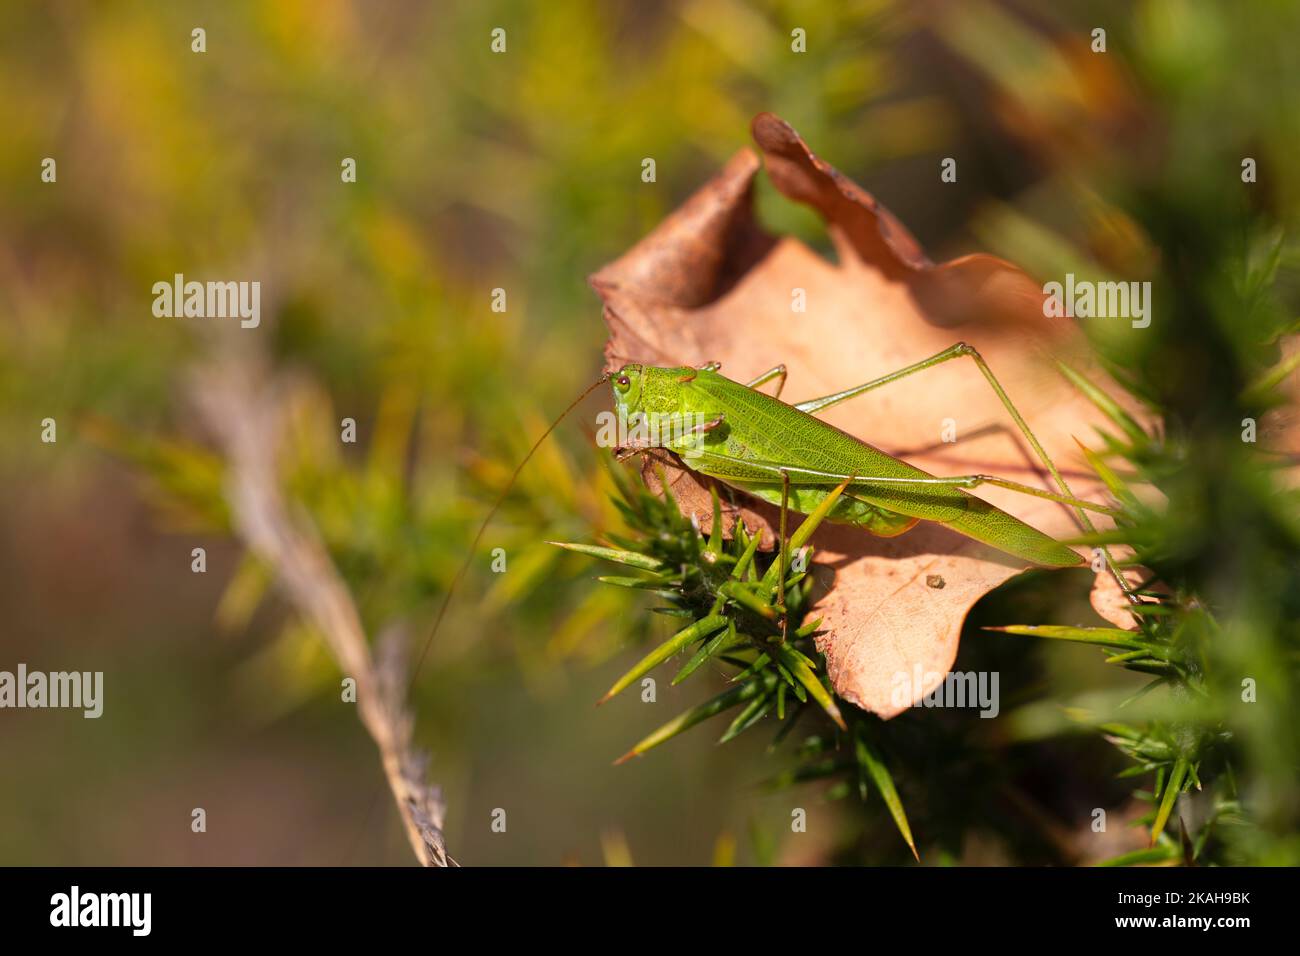 bright green grasshopper perched on a dry brown leaf on a sunny day in nature. green and yellow tones. Copy space. Stock Photo